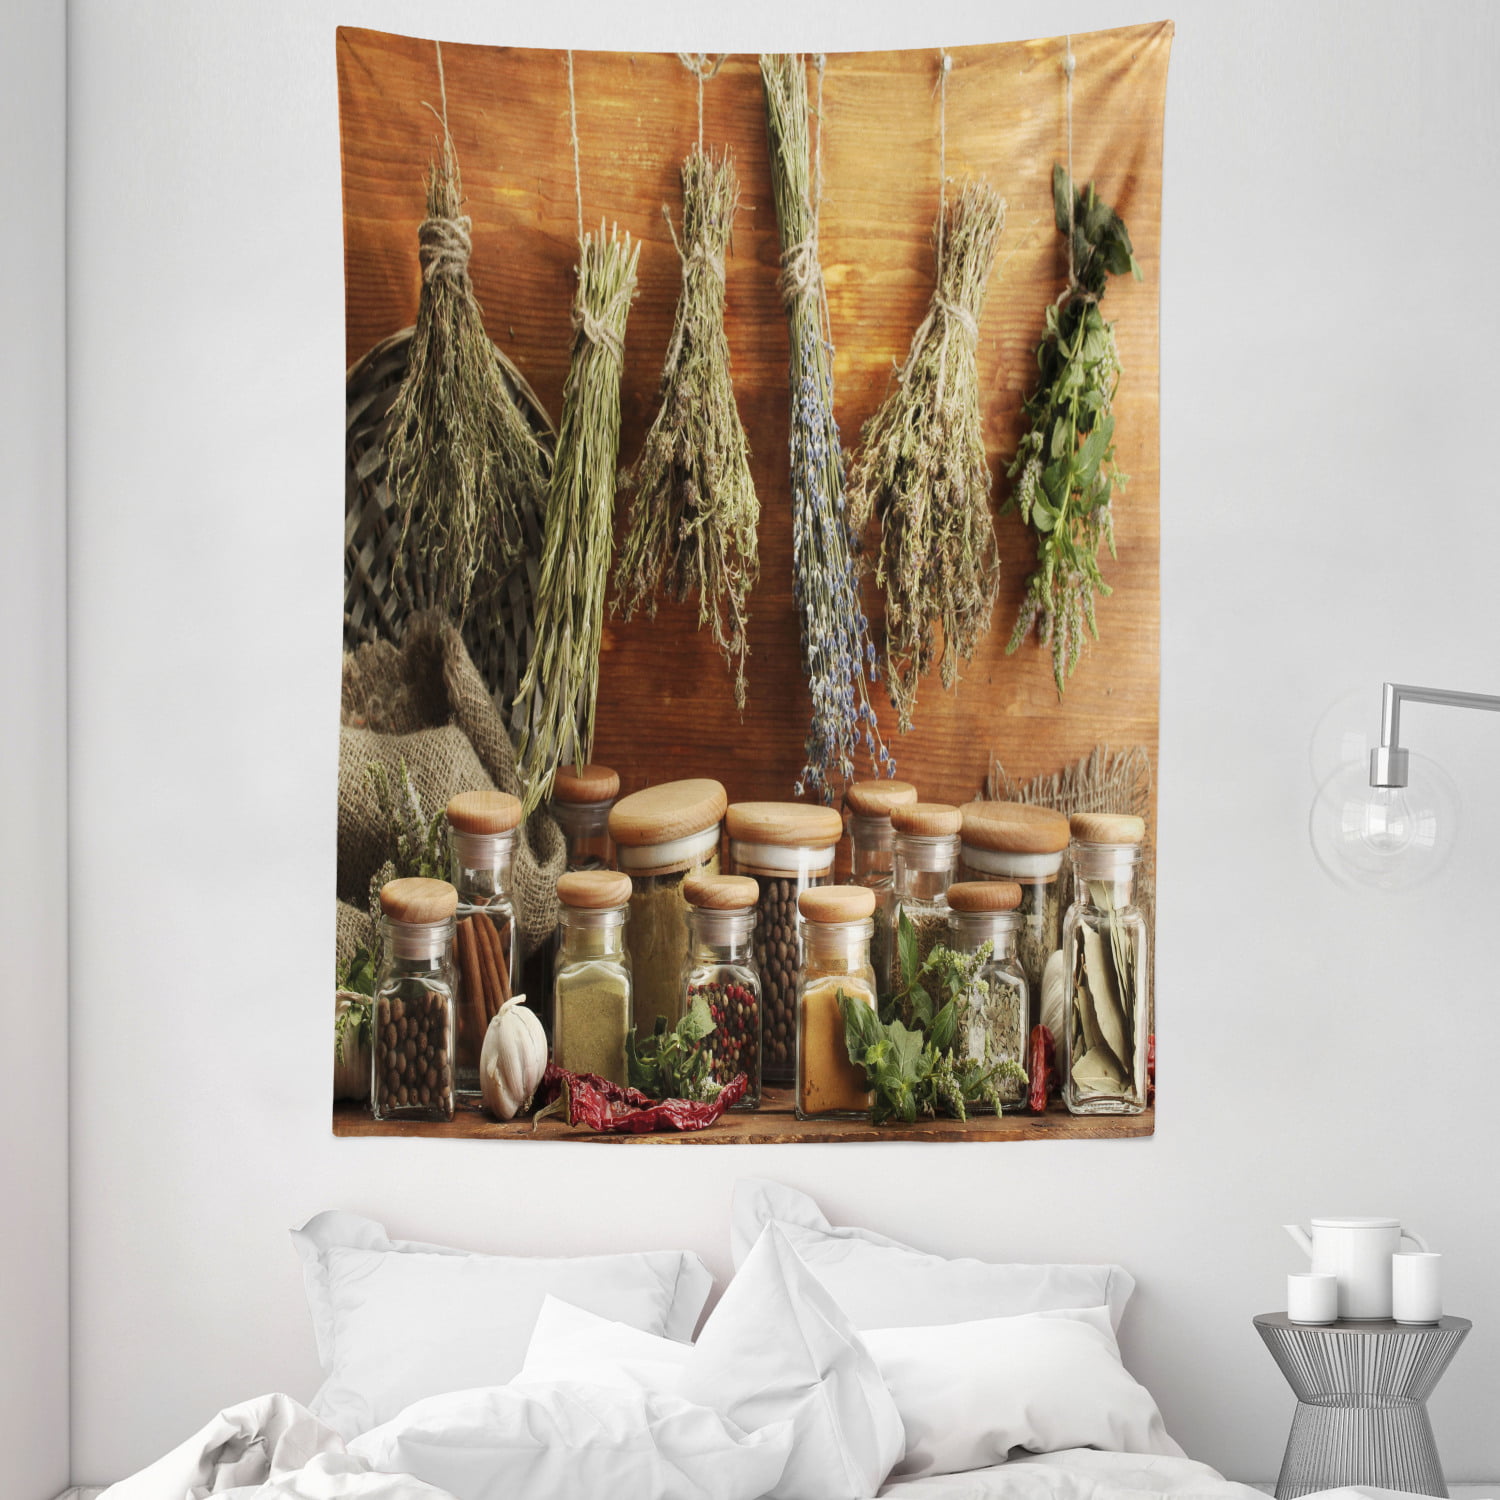 3D Wall Decor Tapestry Hanging Backdrop Curtain for Bedroom Living Room Dorm 